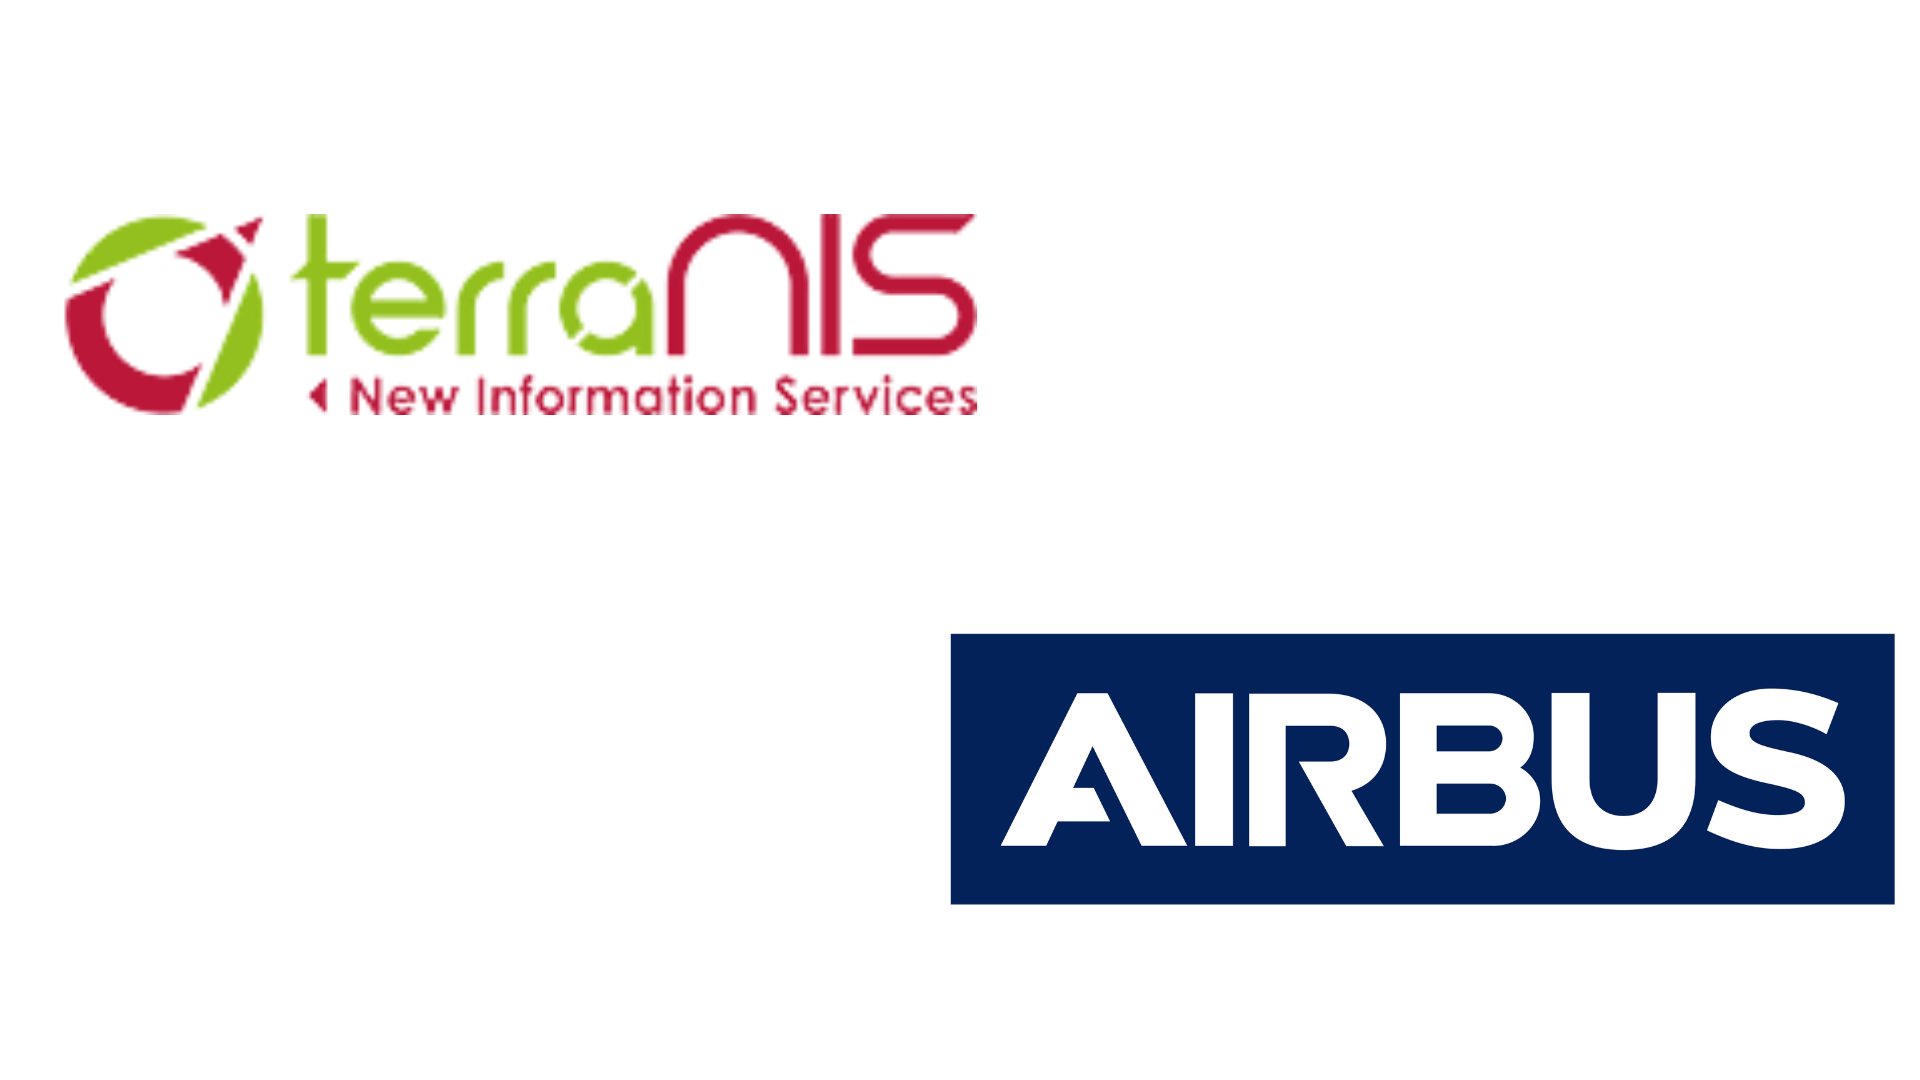 Airbus signs agreement with TerraNIS to export Farmstar in Europe